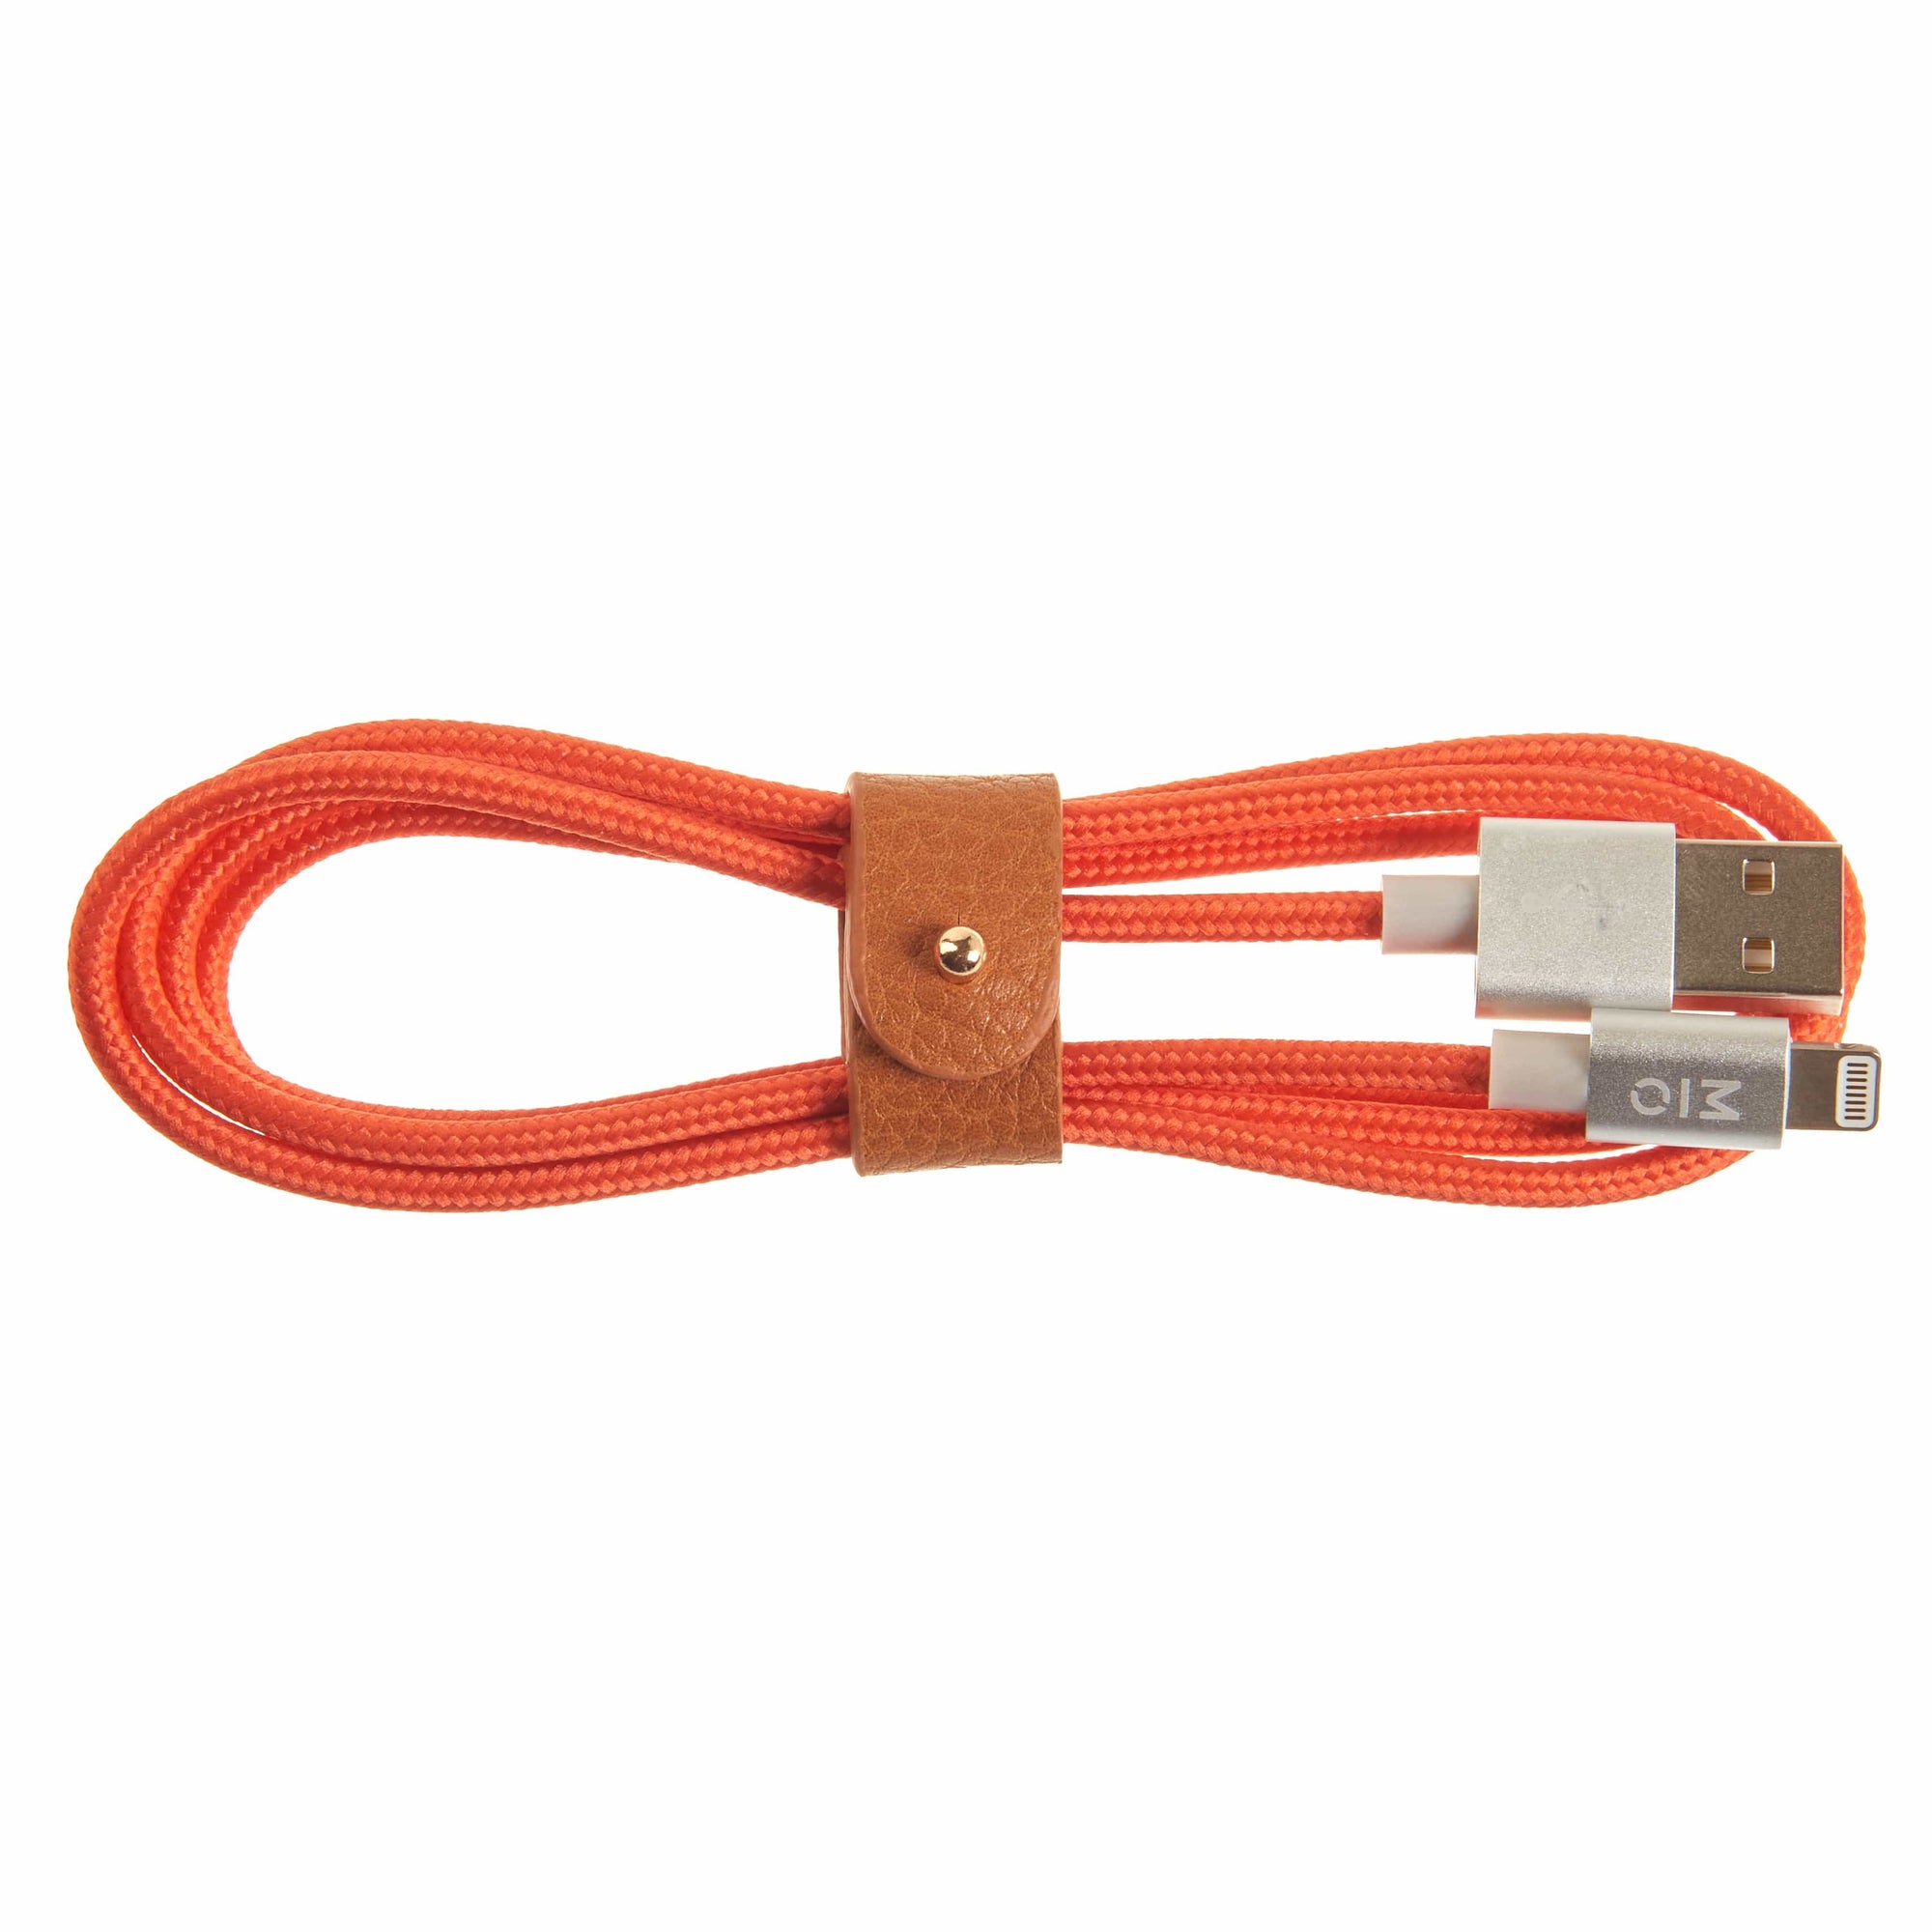 Motile Commuter Cord Charger - Red Orange Motile Electronics 38557